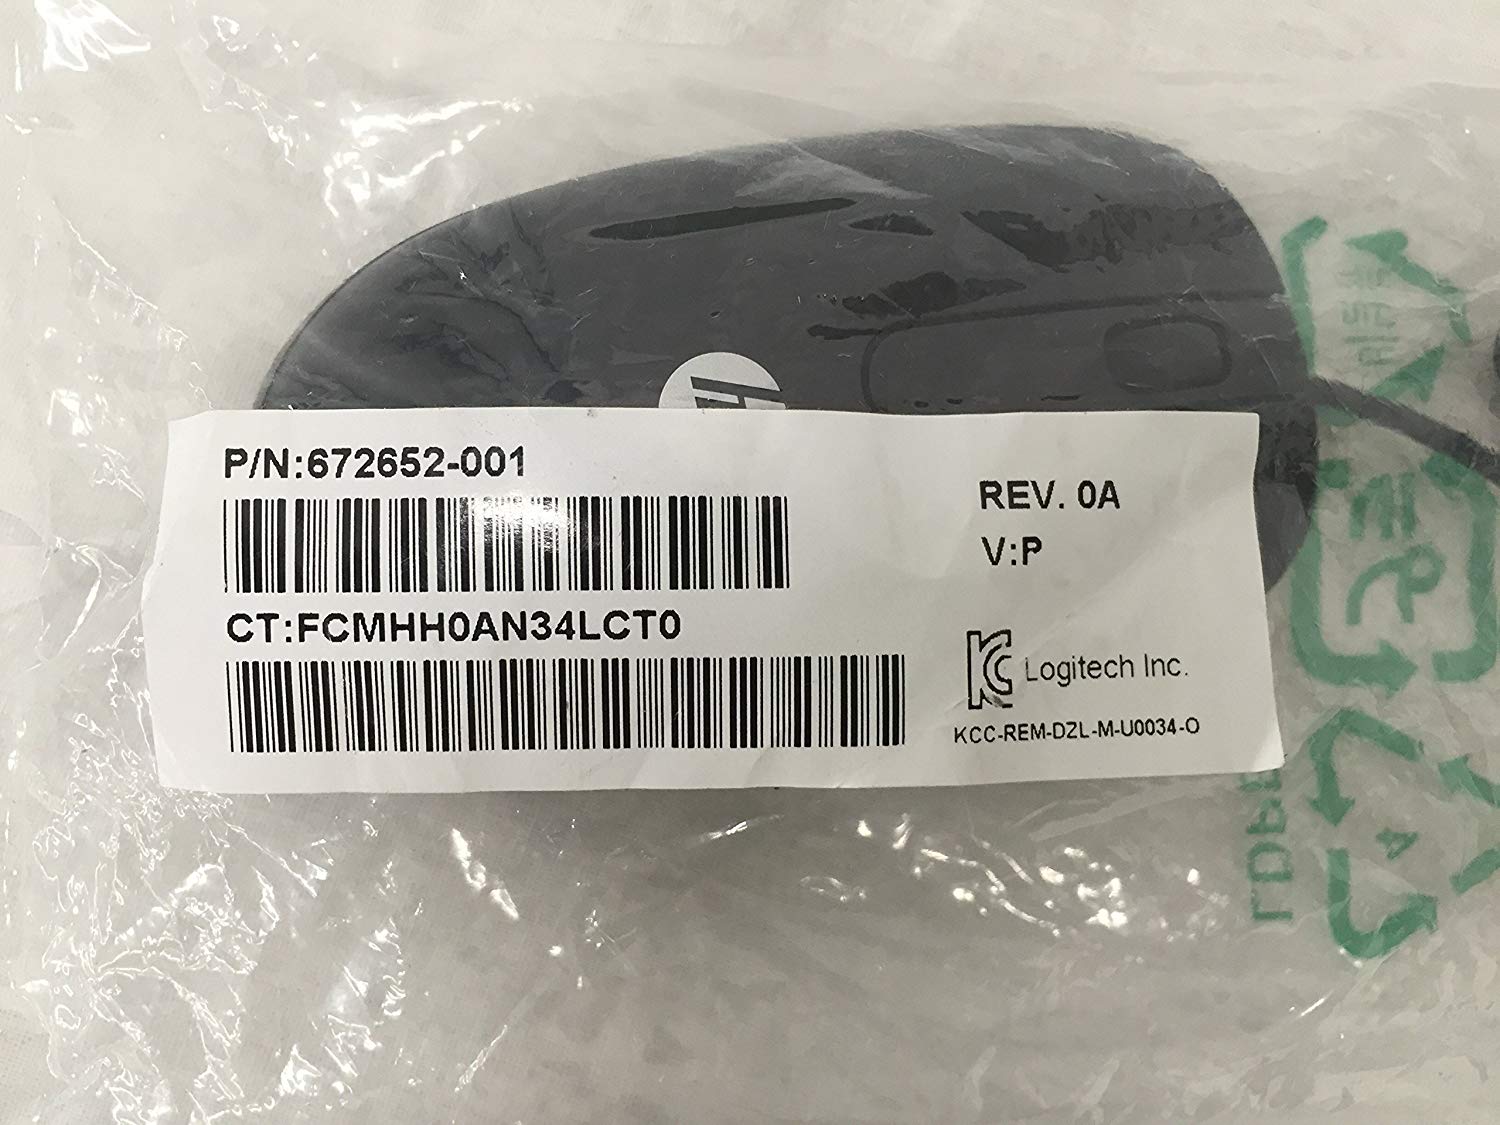 Genuine HP USB 2-Button Optical Mouse P/N: 672652-001 New - Atlas Computers & Electronics 